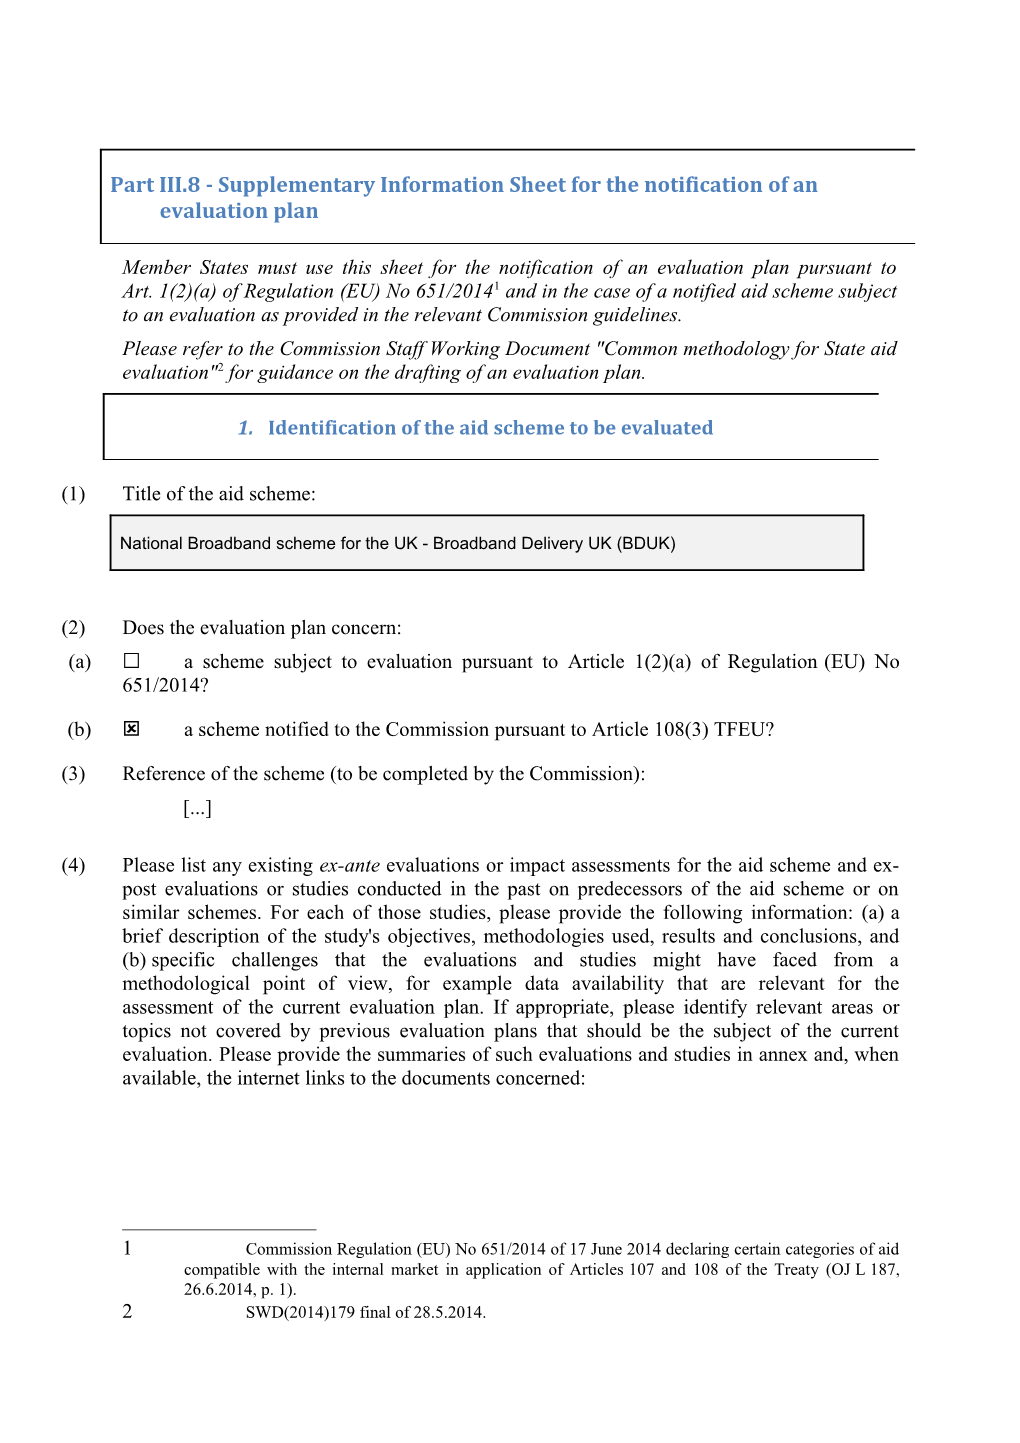 Part III.8 - Supplementary Information Sheet for the Notification of an Evaluation Plan